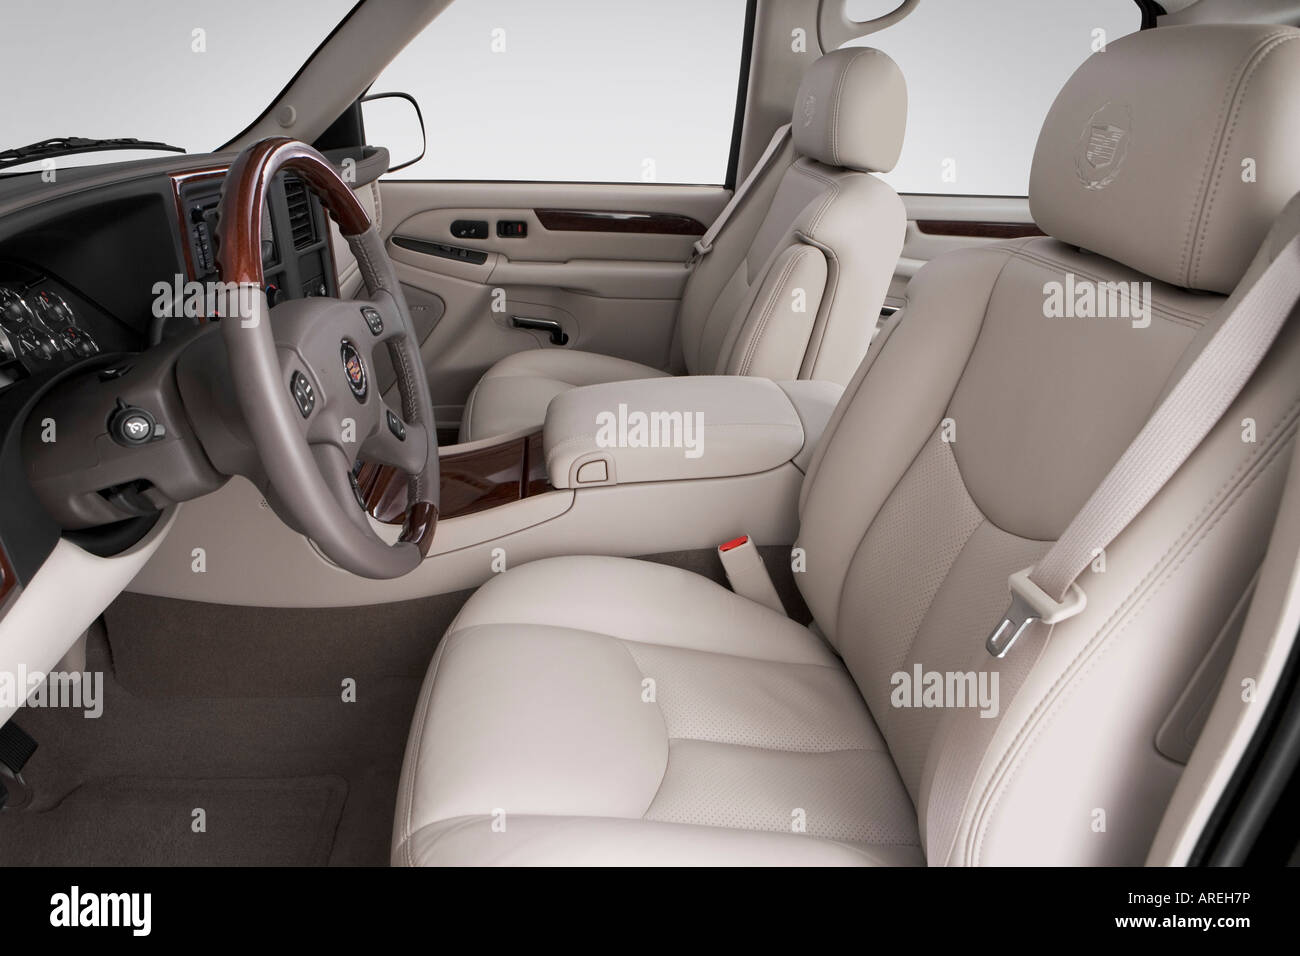 2006 Cadillac Escalade EXT in Black - Front seats Stock Photo - Alamy